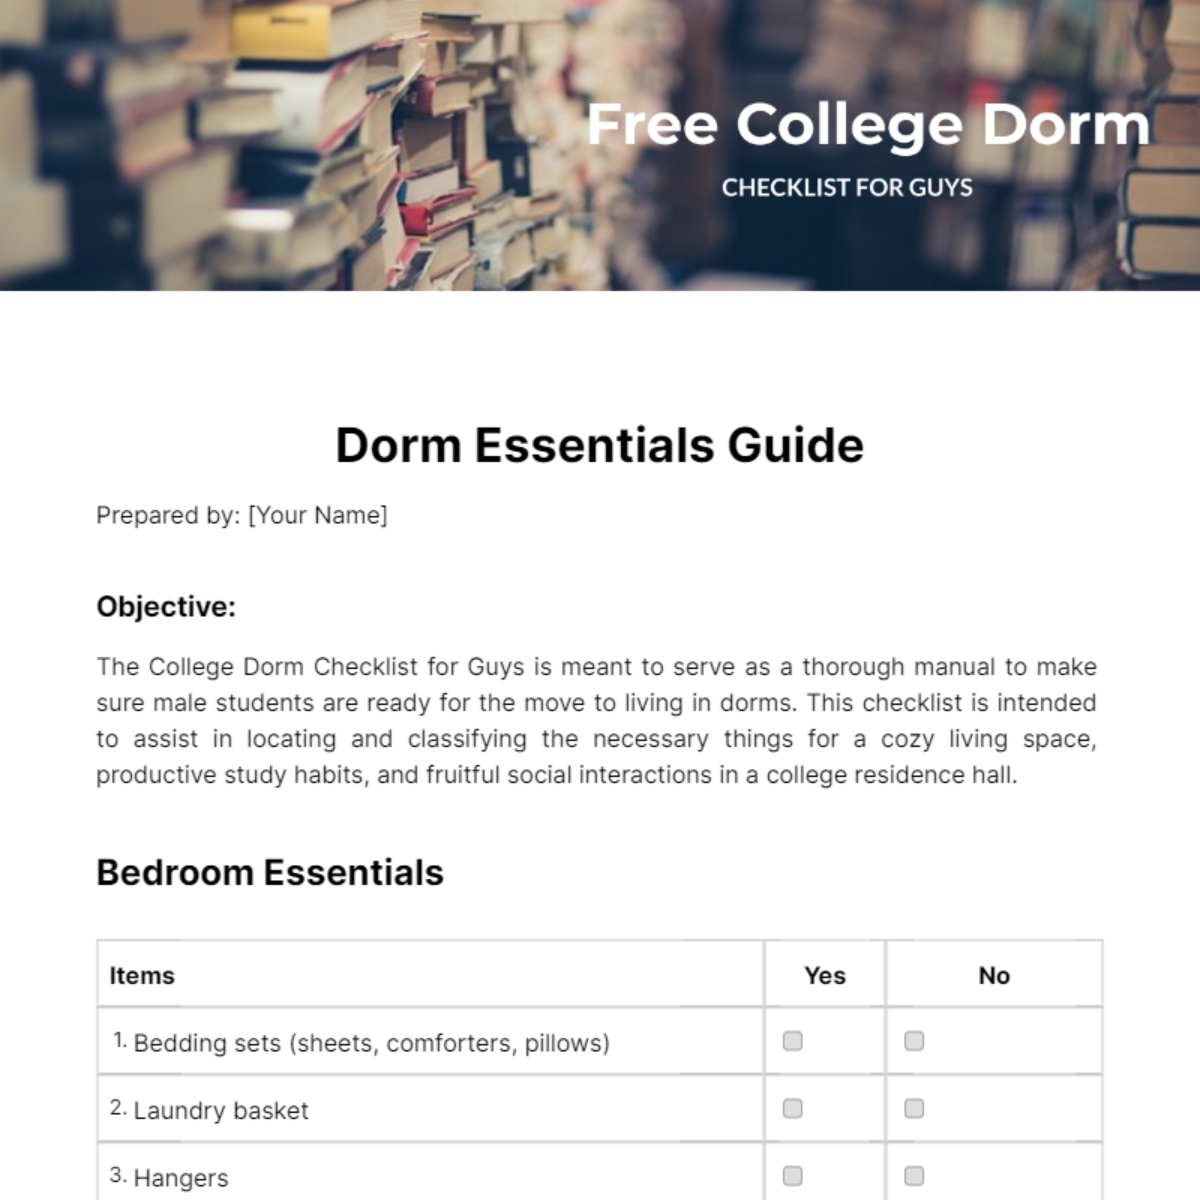 Free College Dorm Checklist For Guys Template